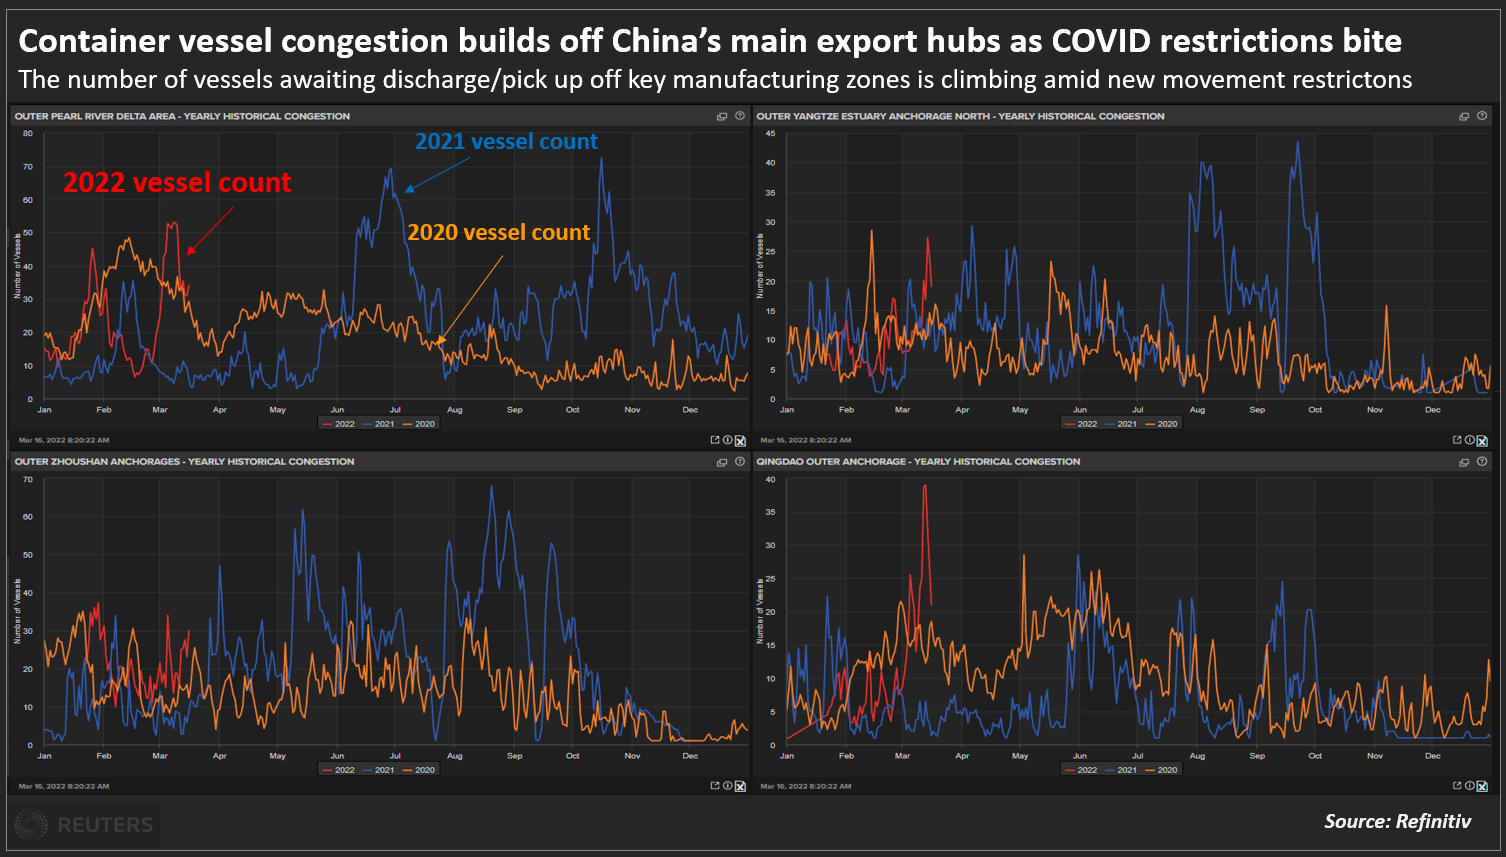 Container vessel congestion builds off China’s main export hubs as COVID restrictions bite